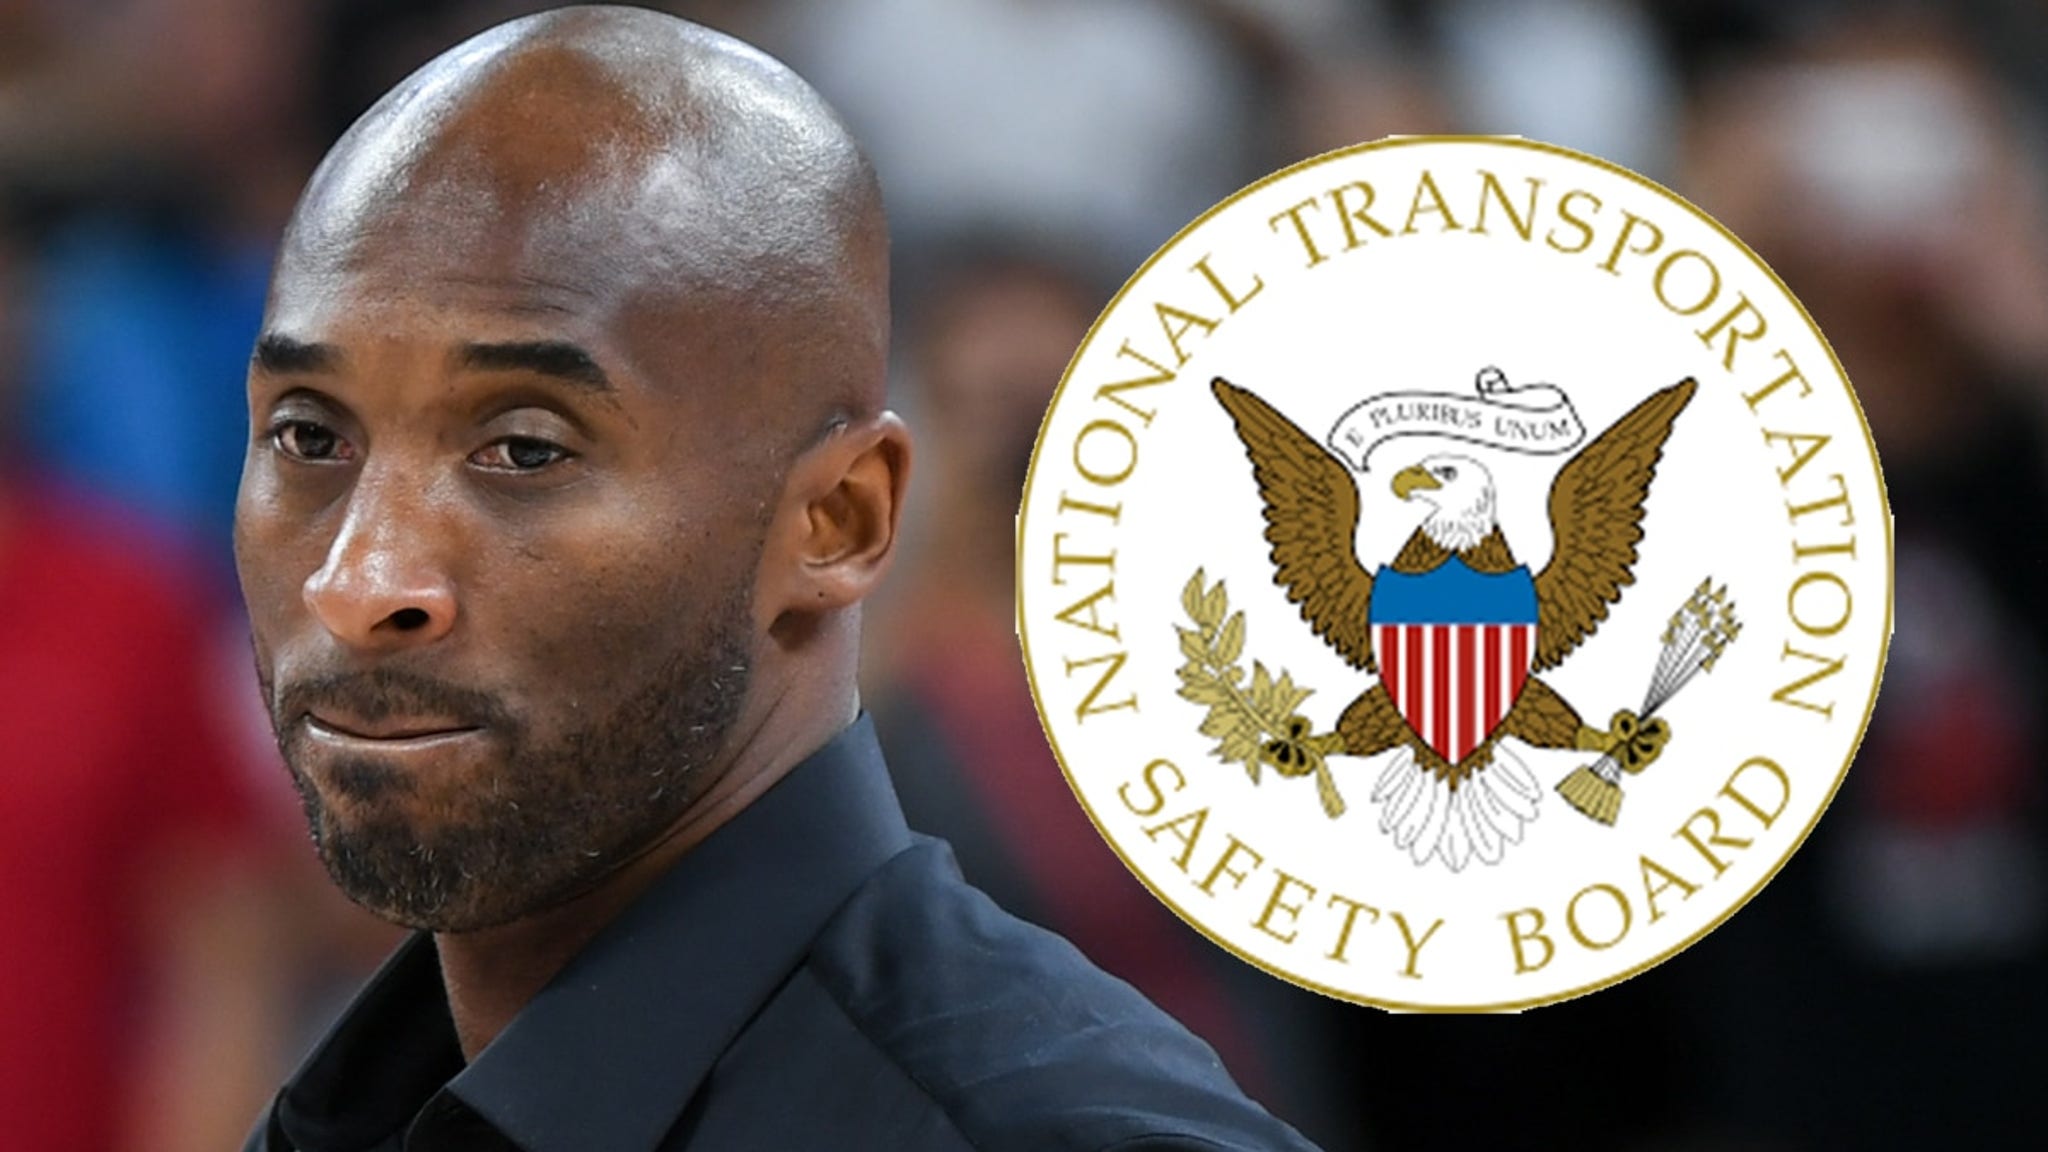 Kobe Bryant did NOT pressure the pilot to fly in dangerous conditions, say investigators